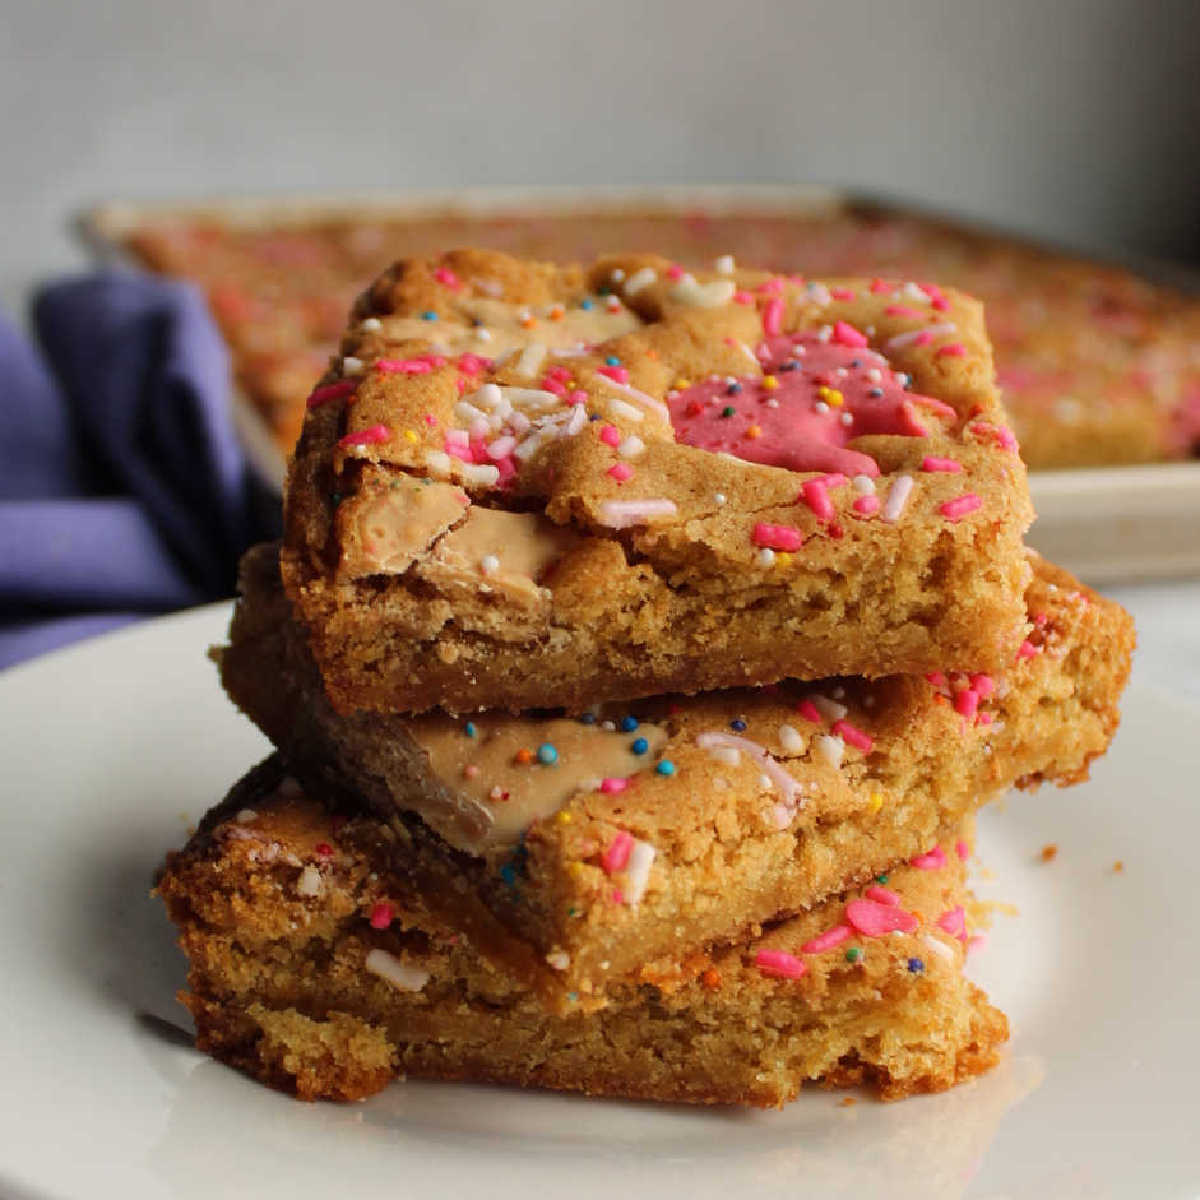 Stack of chewy brown sugar blondies with pink and white frosted animal crackers and extra sprinkles baked in.